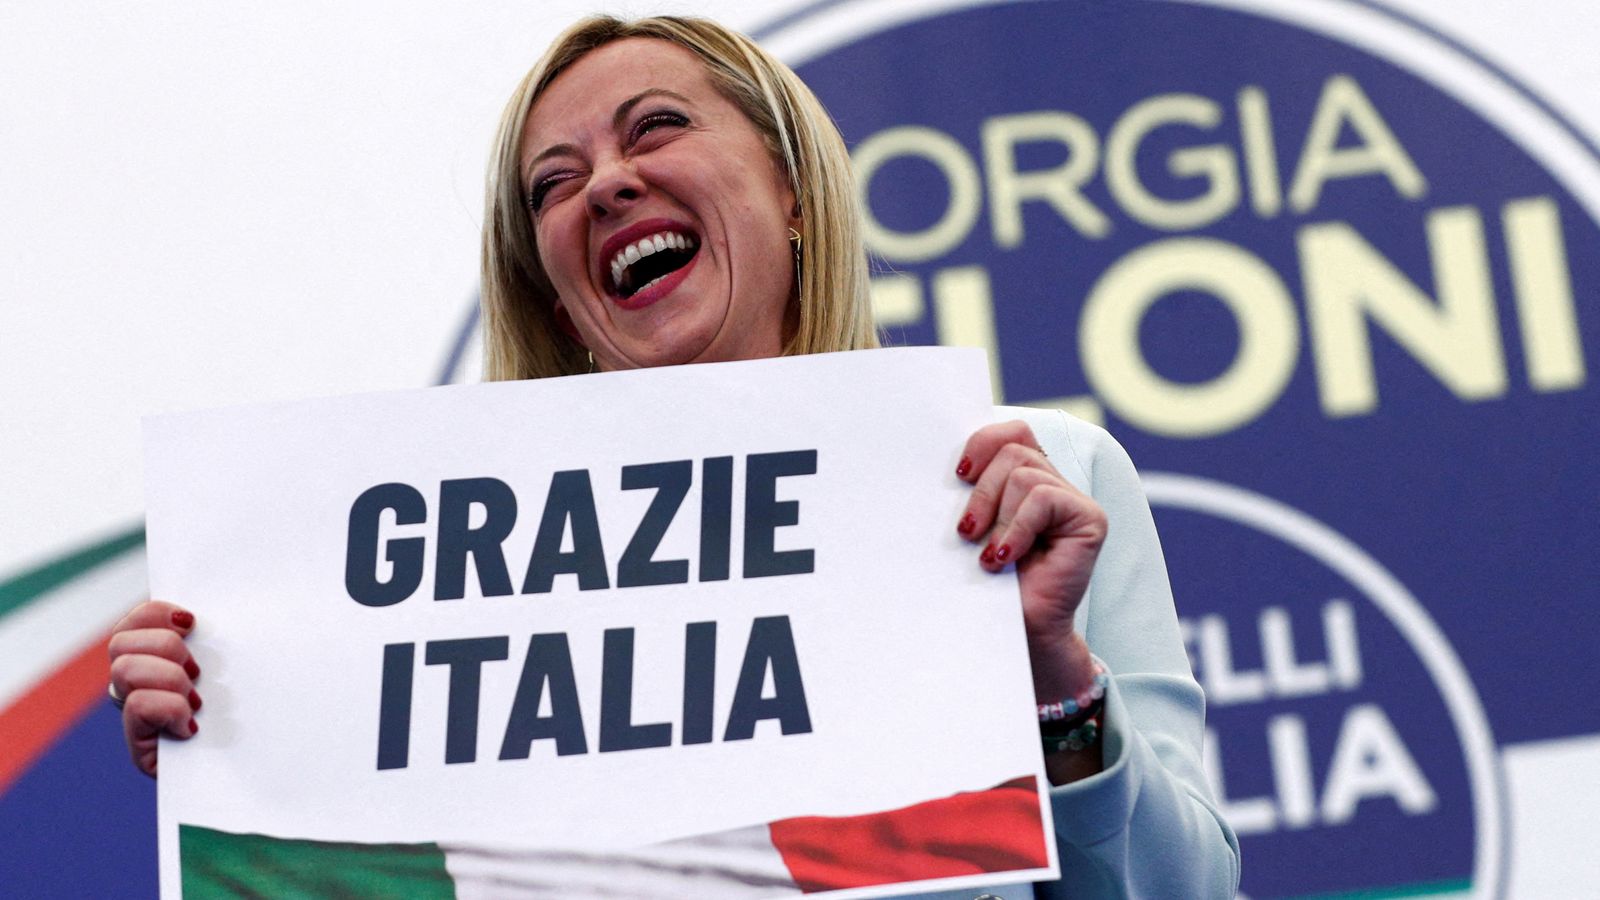 Giorgia Meloni weathered the electoral storm – but what is top of her to-do list?